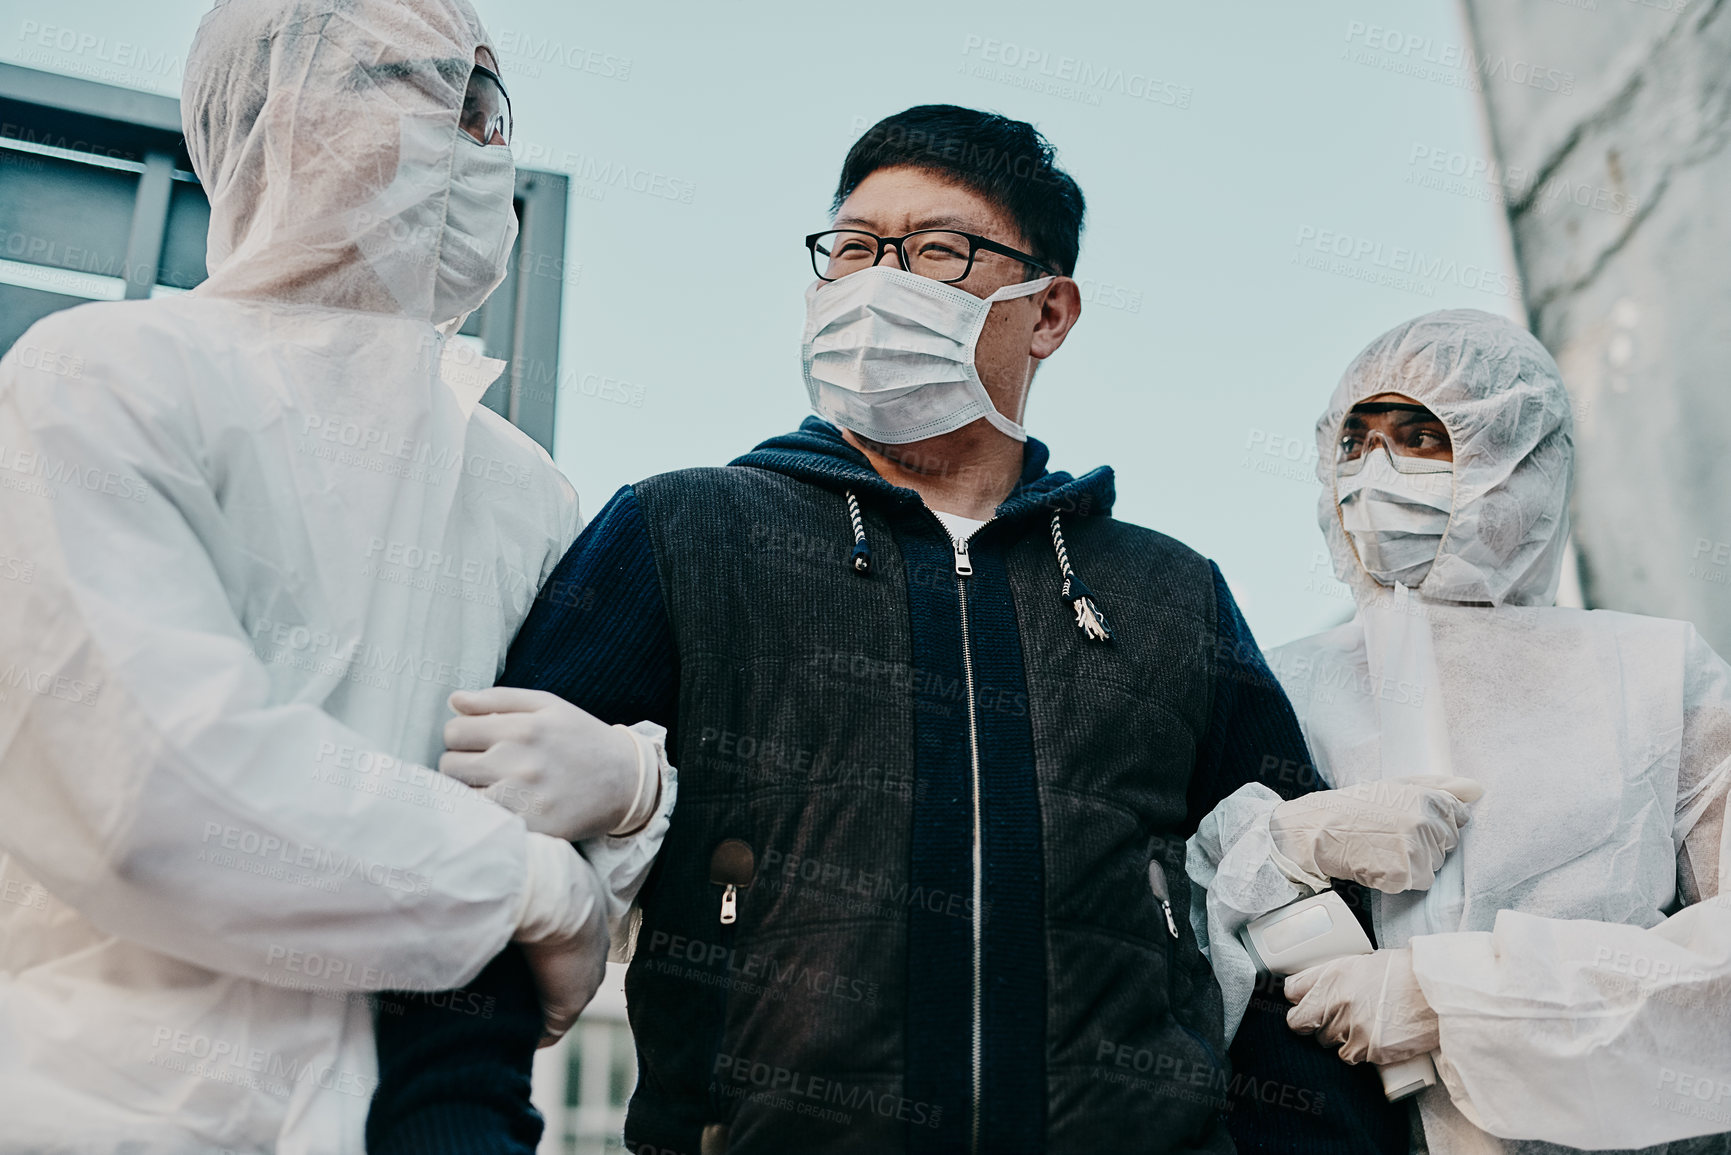 Buy stock photo Asian man breaking covid regulation getting taken away or arrested by healthcare workers wearing hazmat protective suits. Male removed for not following the rules or restrictions of the pandemic.